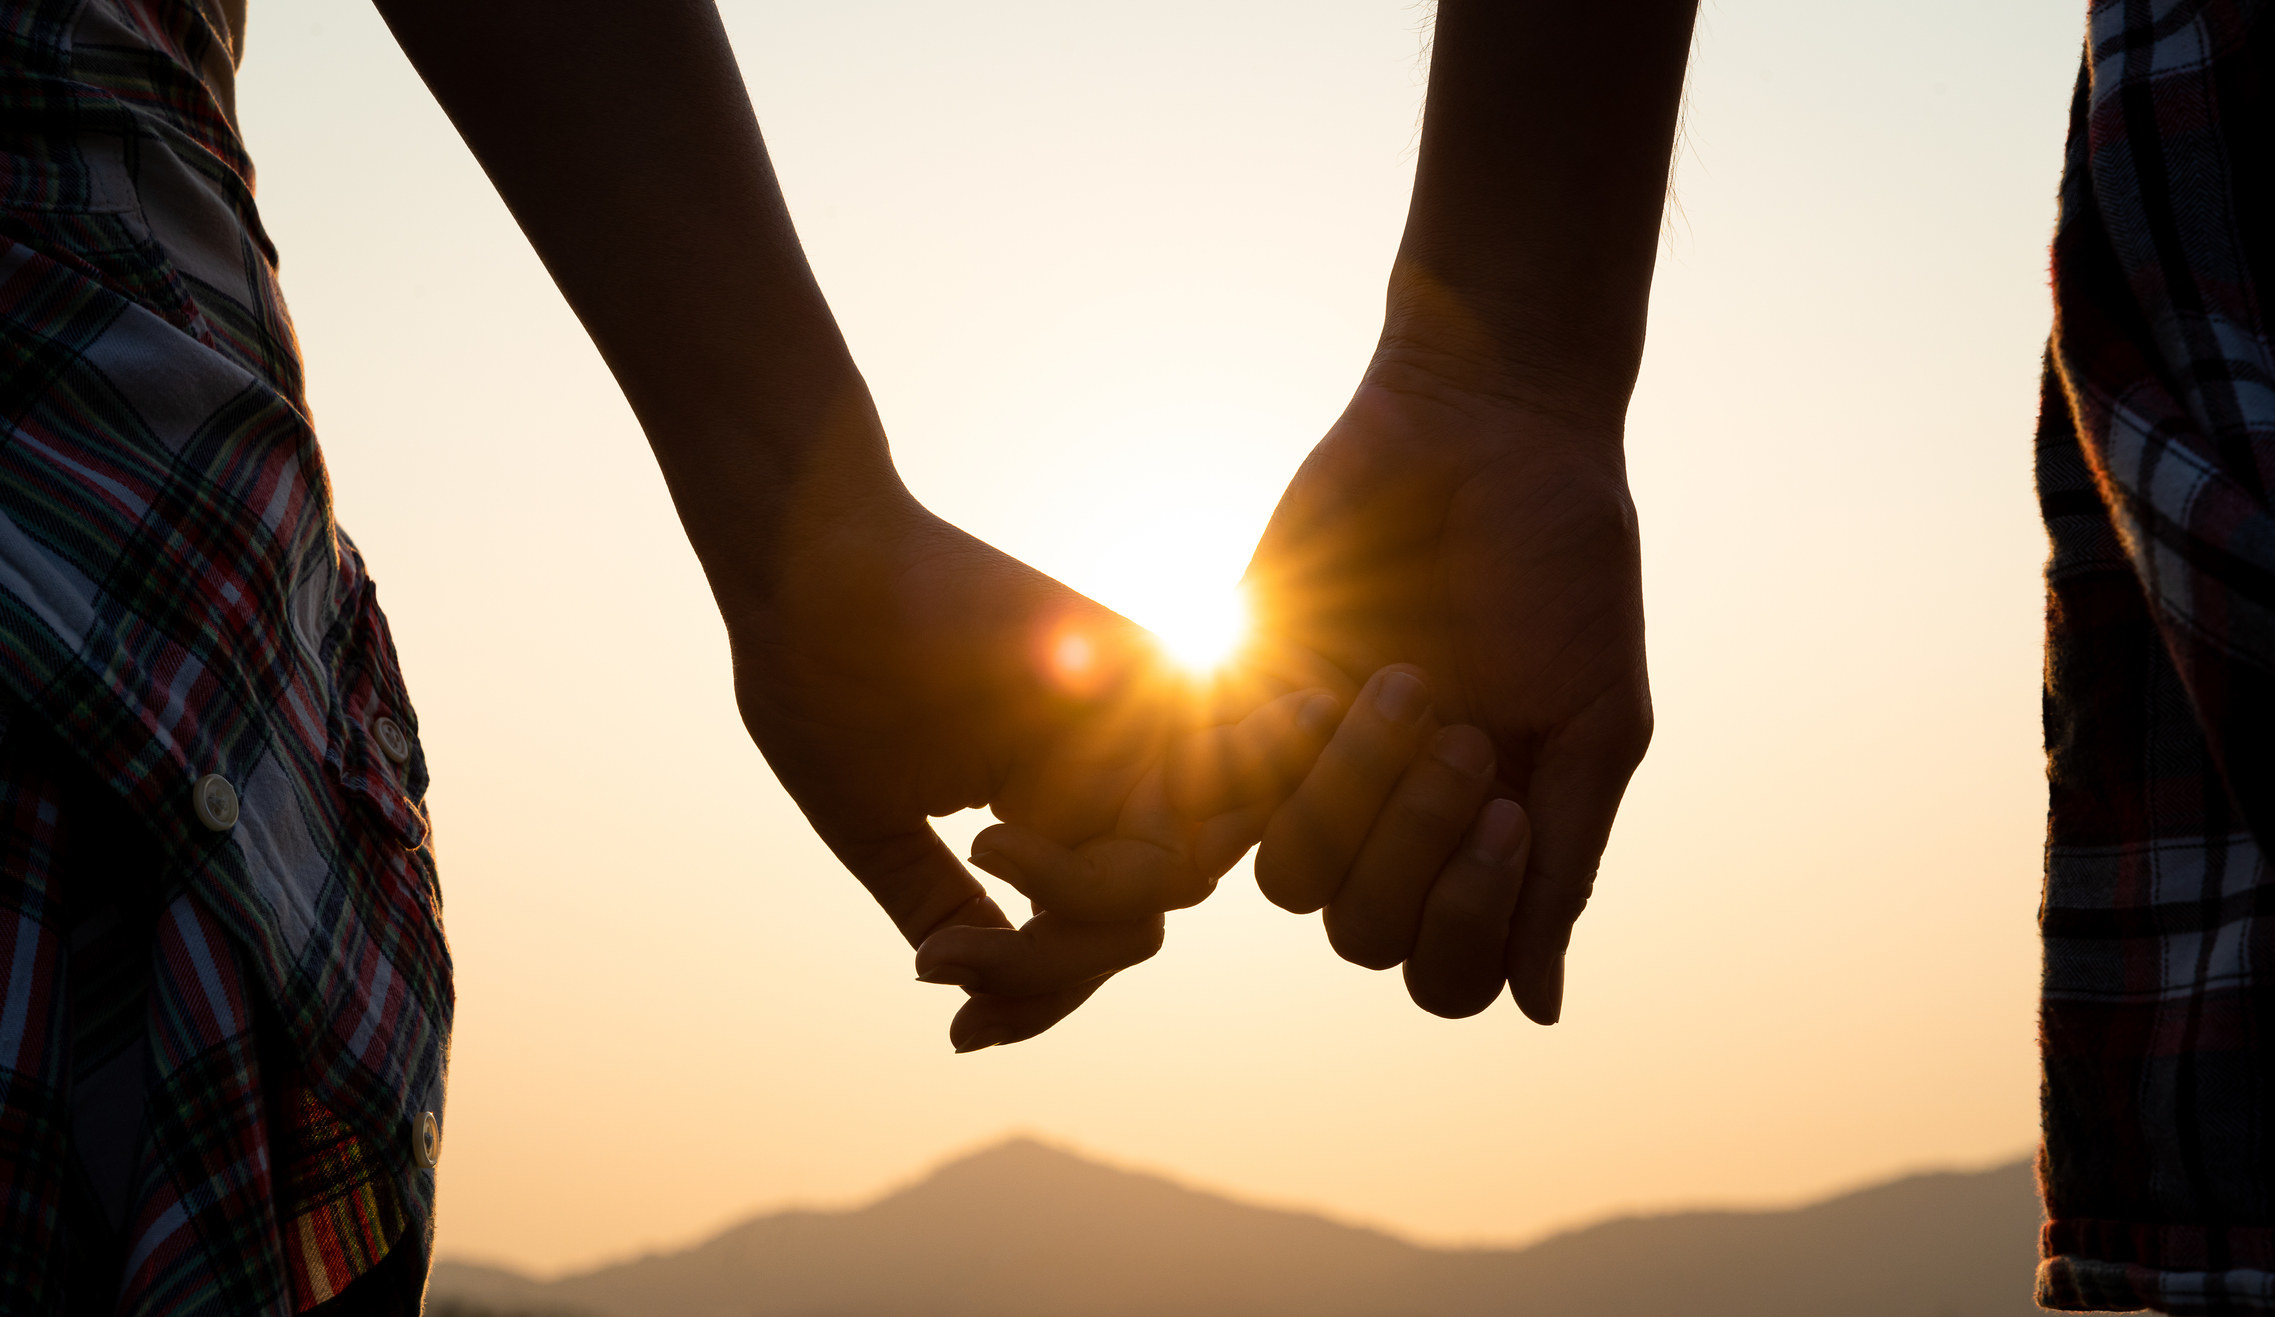 A couple holding hands in front of the sun.